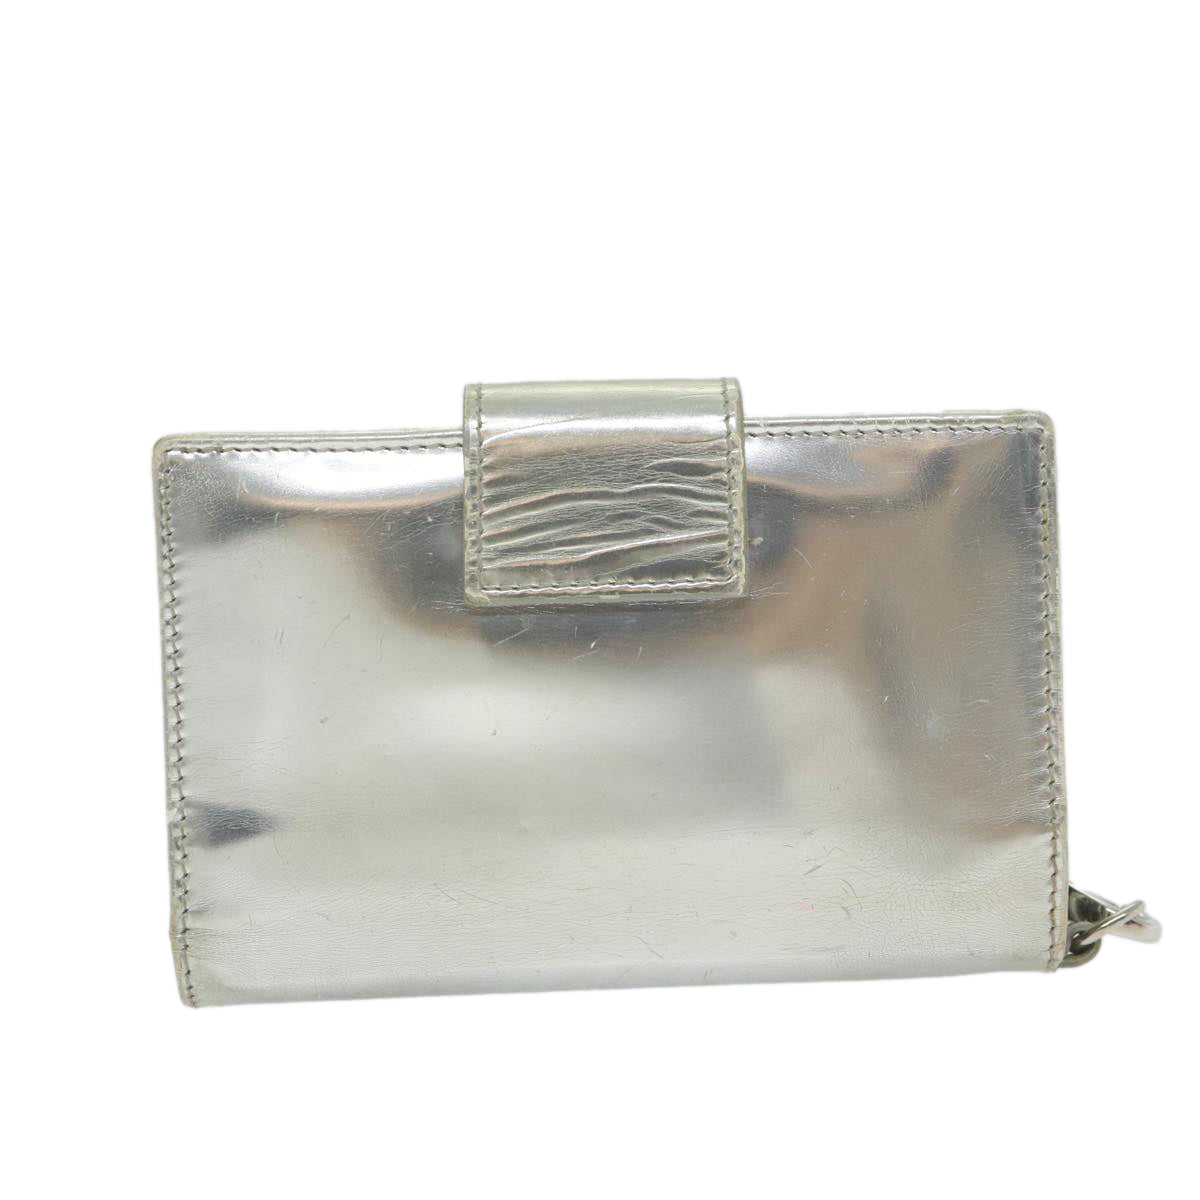 Miu Miu Chain Wallet Patent leather Silver Auth hk979 - 0